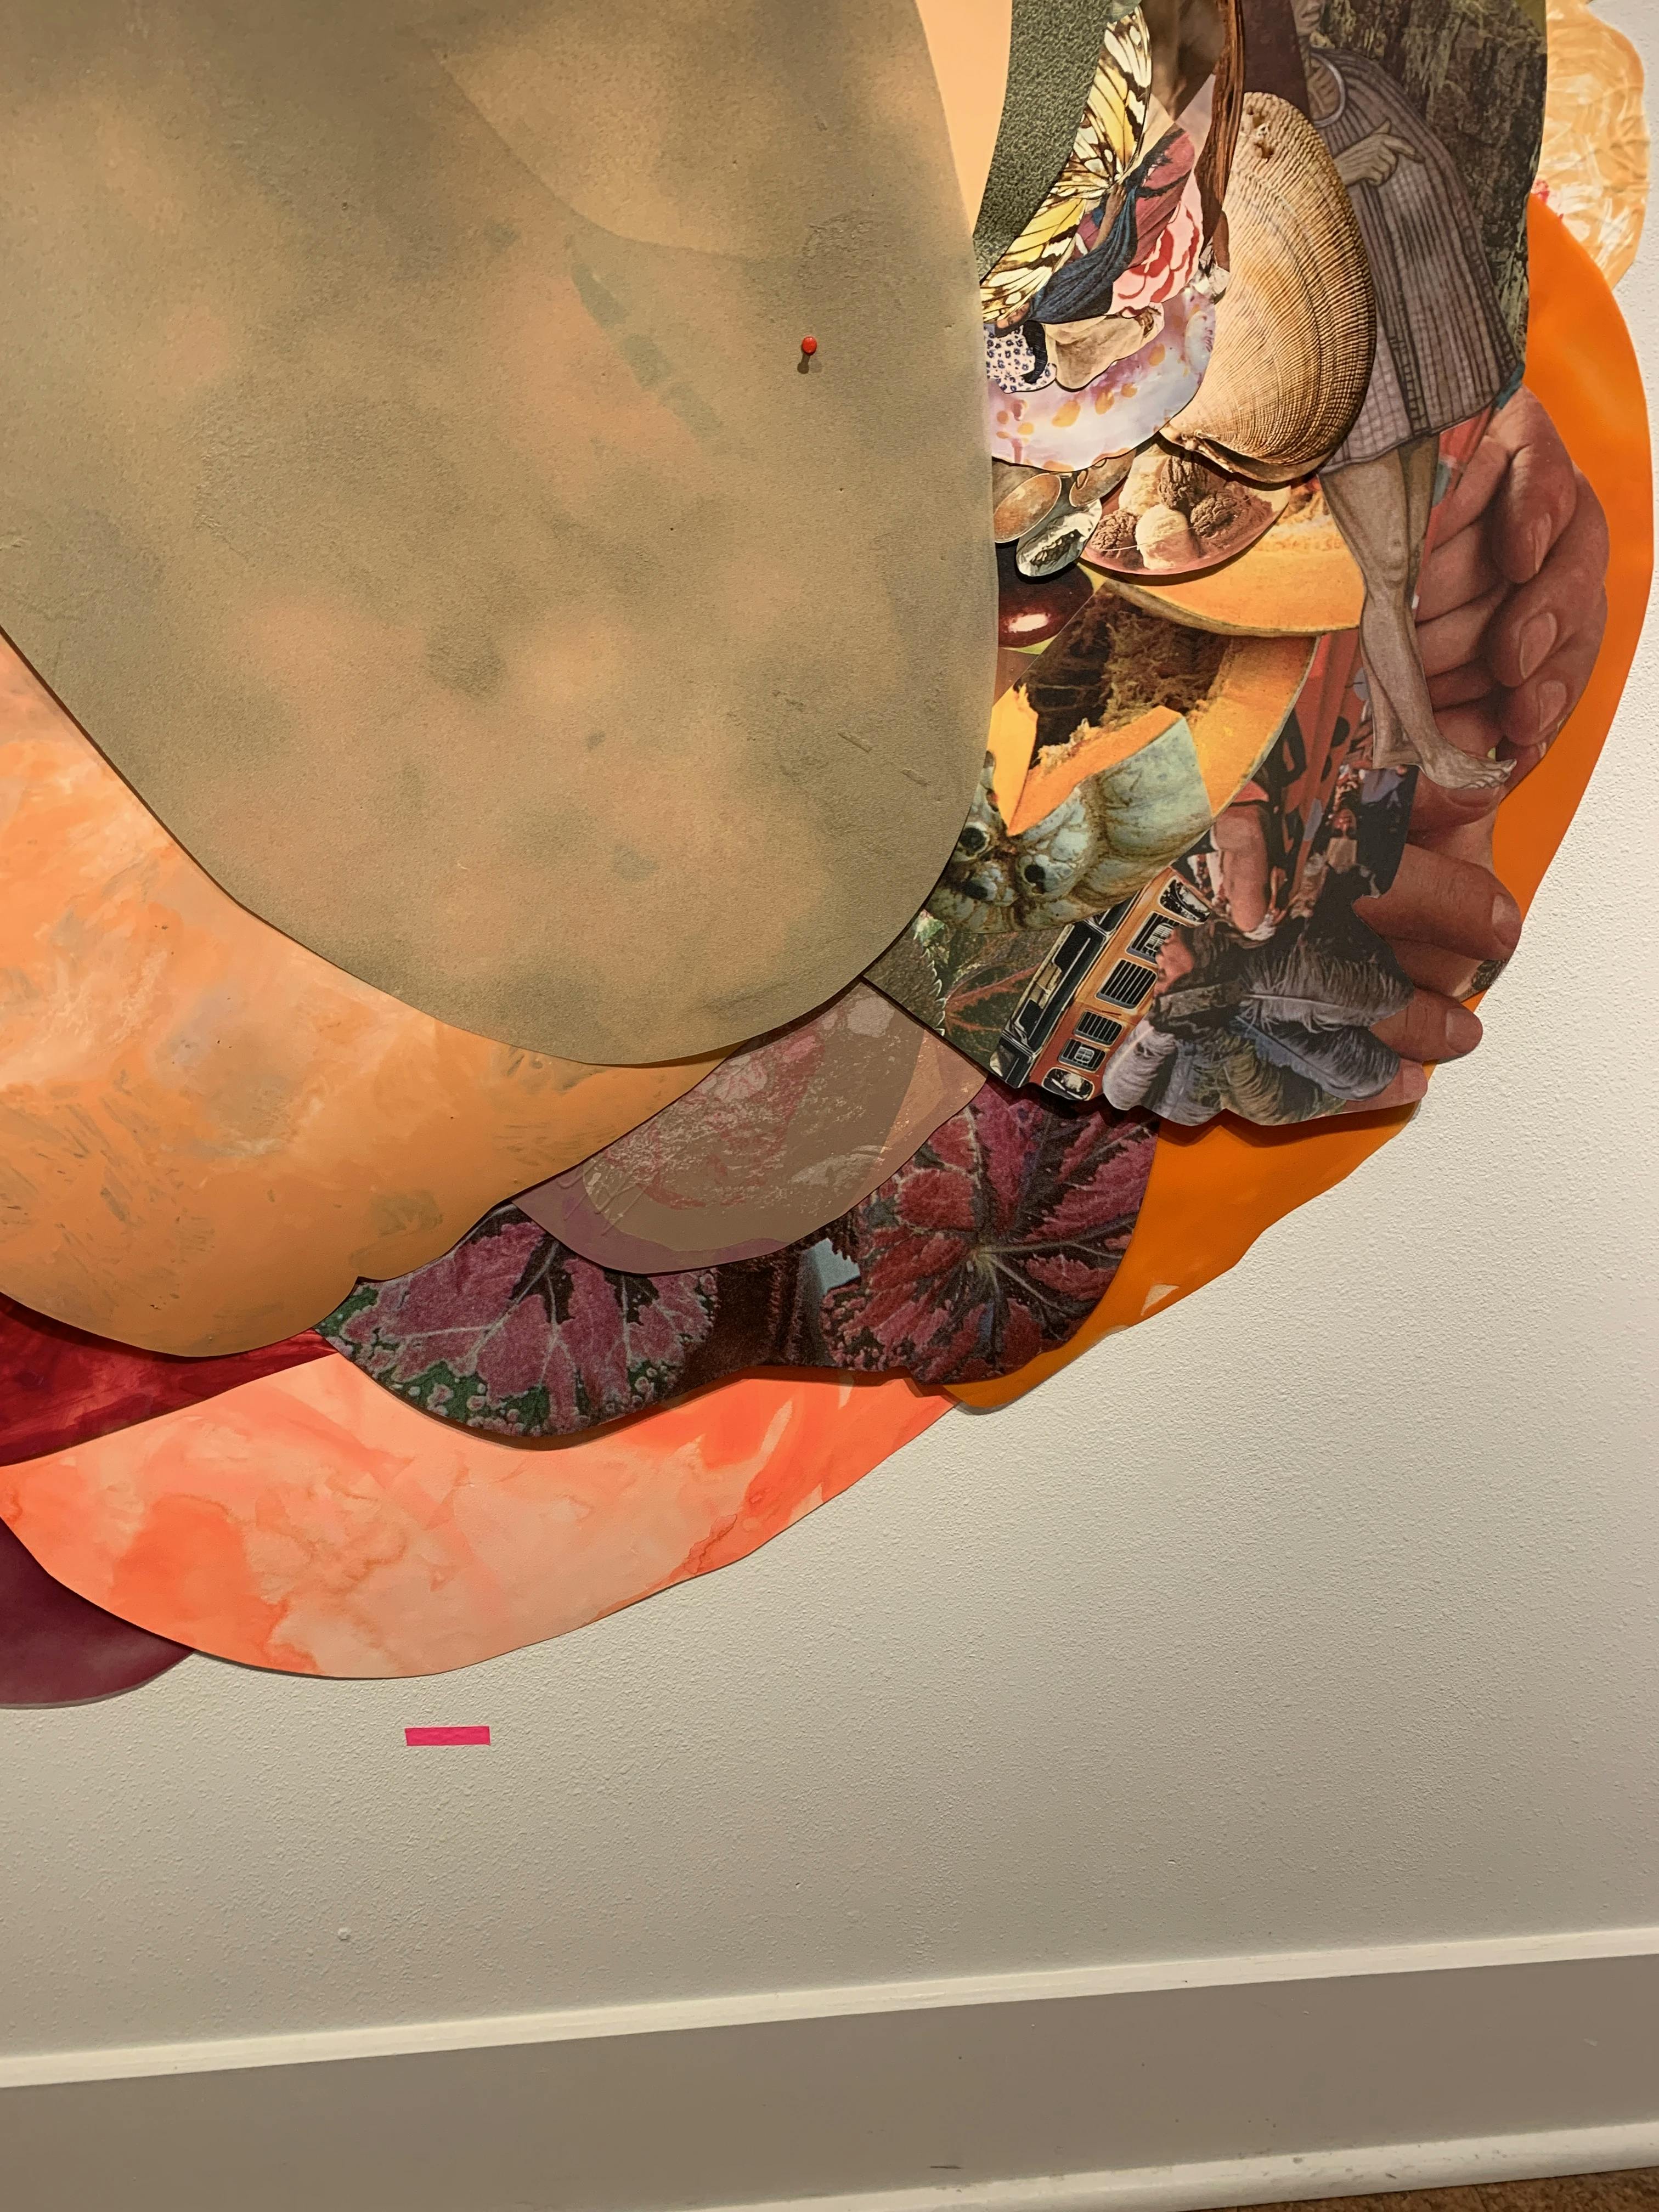 A close-up of an oversized, site-specific collage installed on a white wall by artist Xochi Solis.